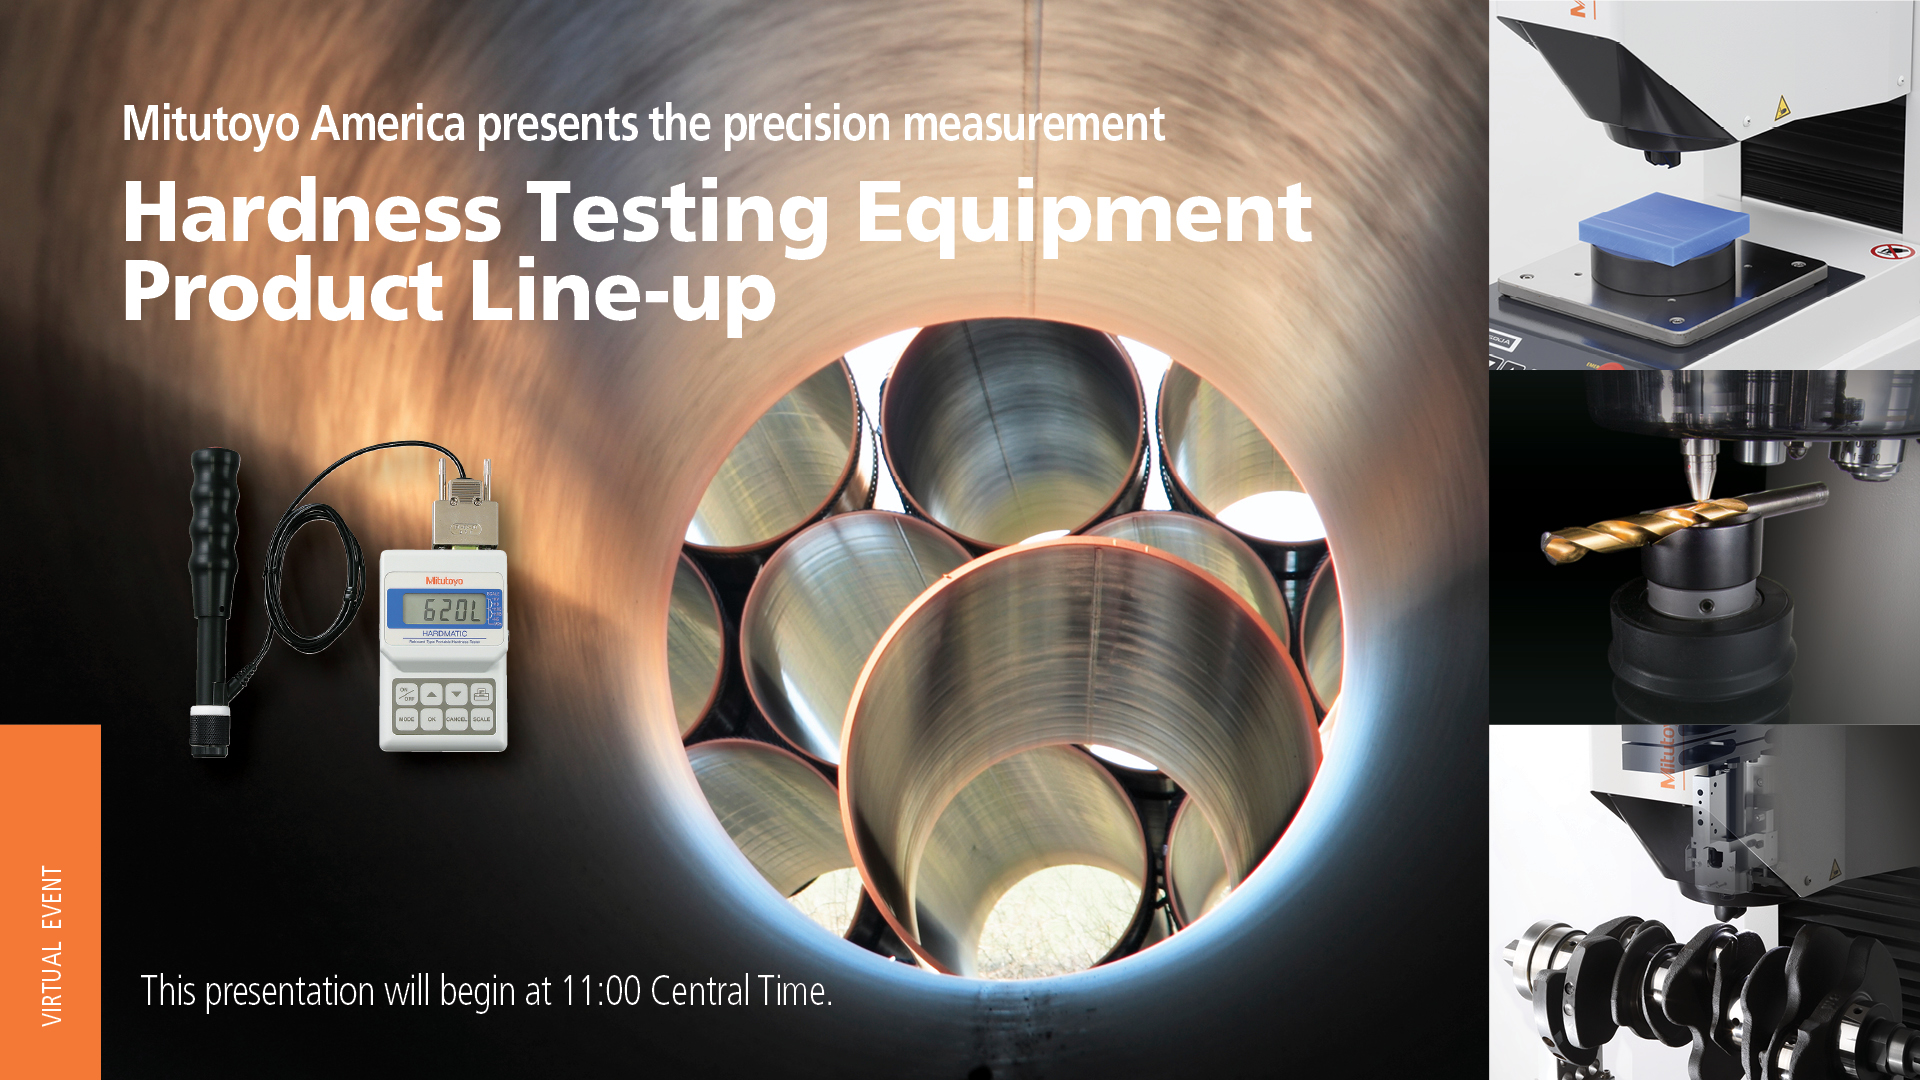 Hardness Testing Equipment Product Line-Up - Mitutoyo